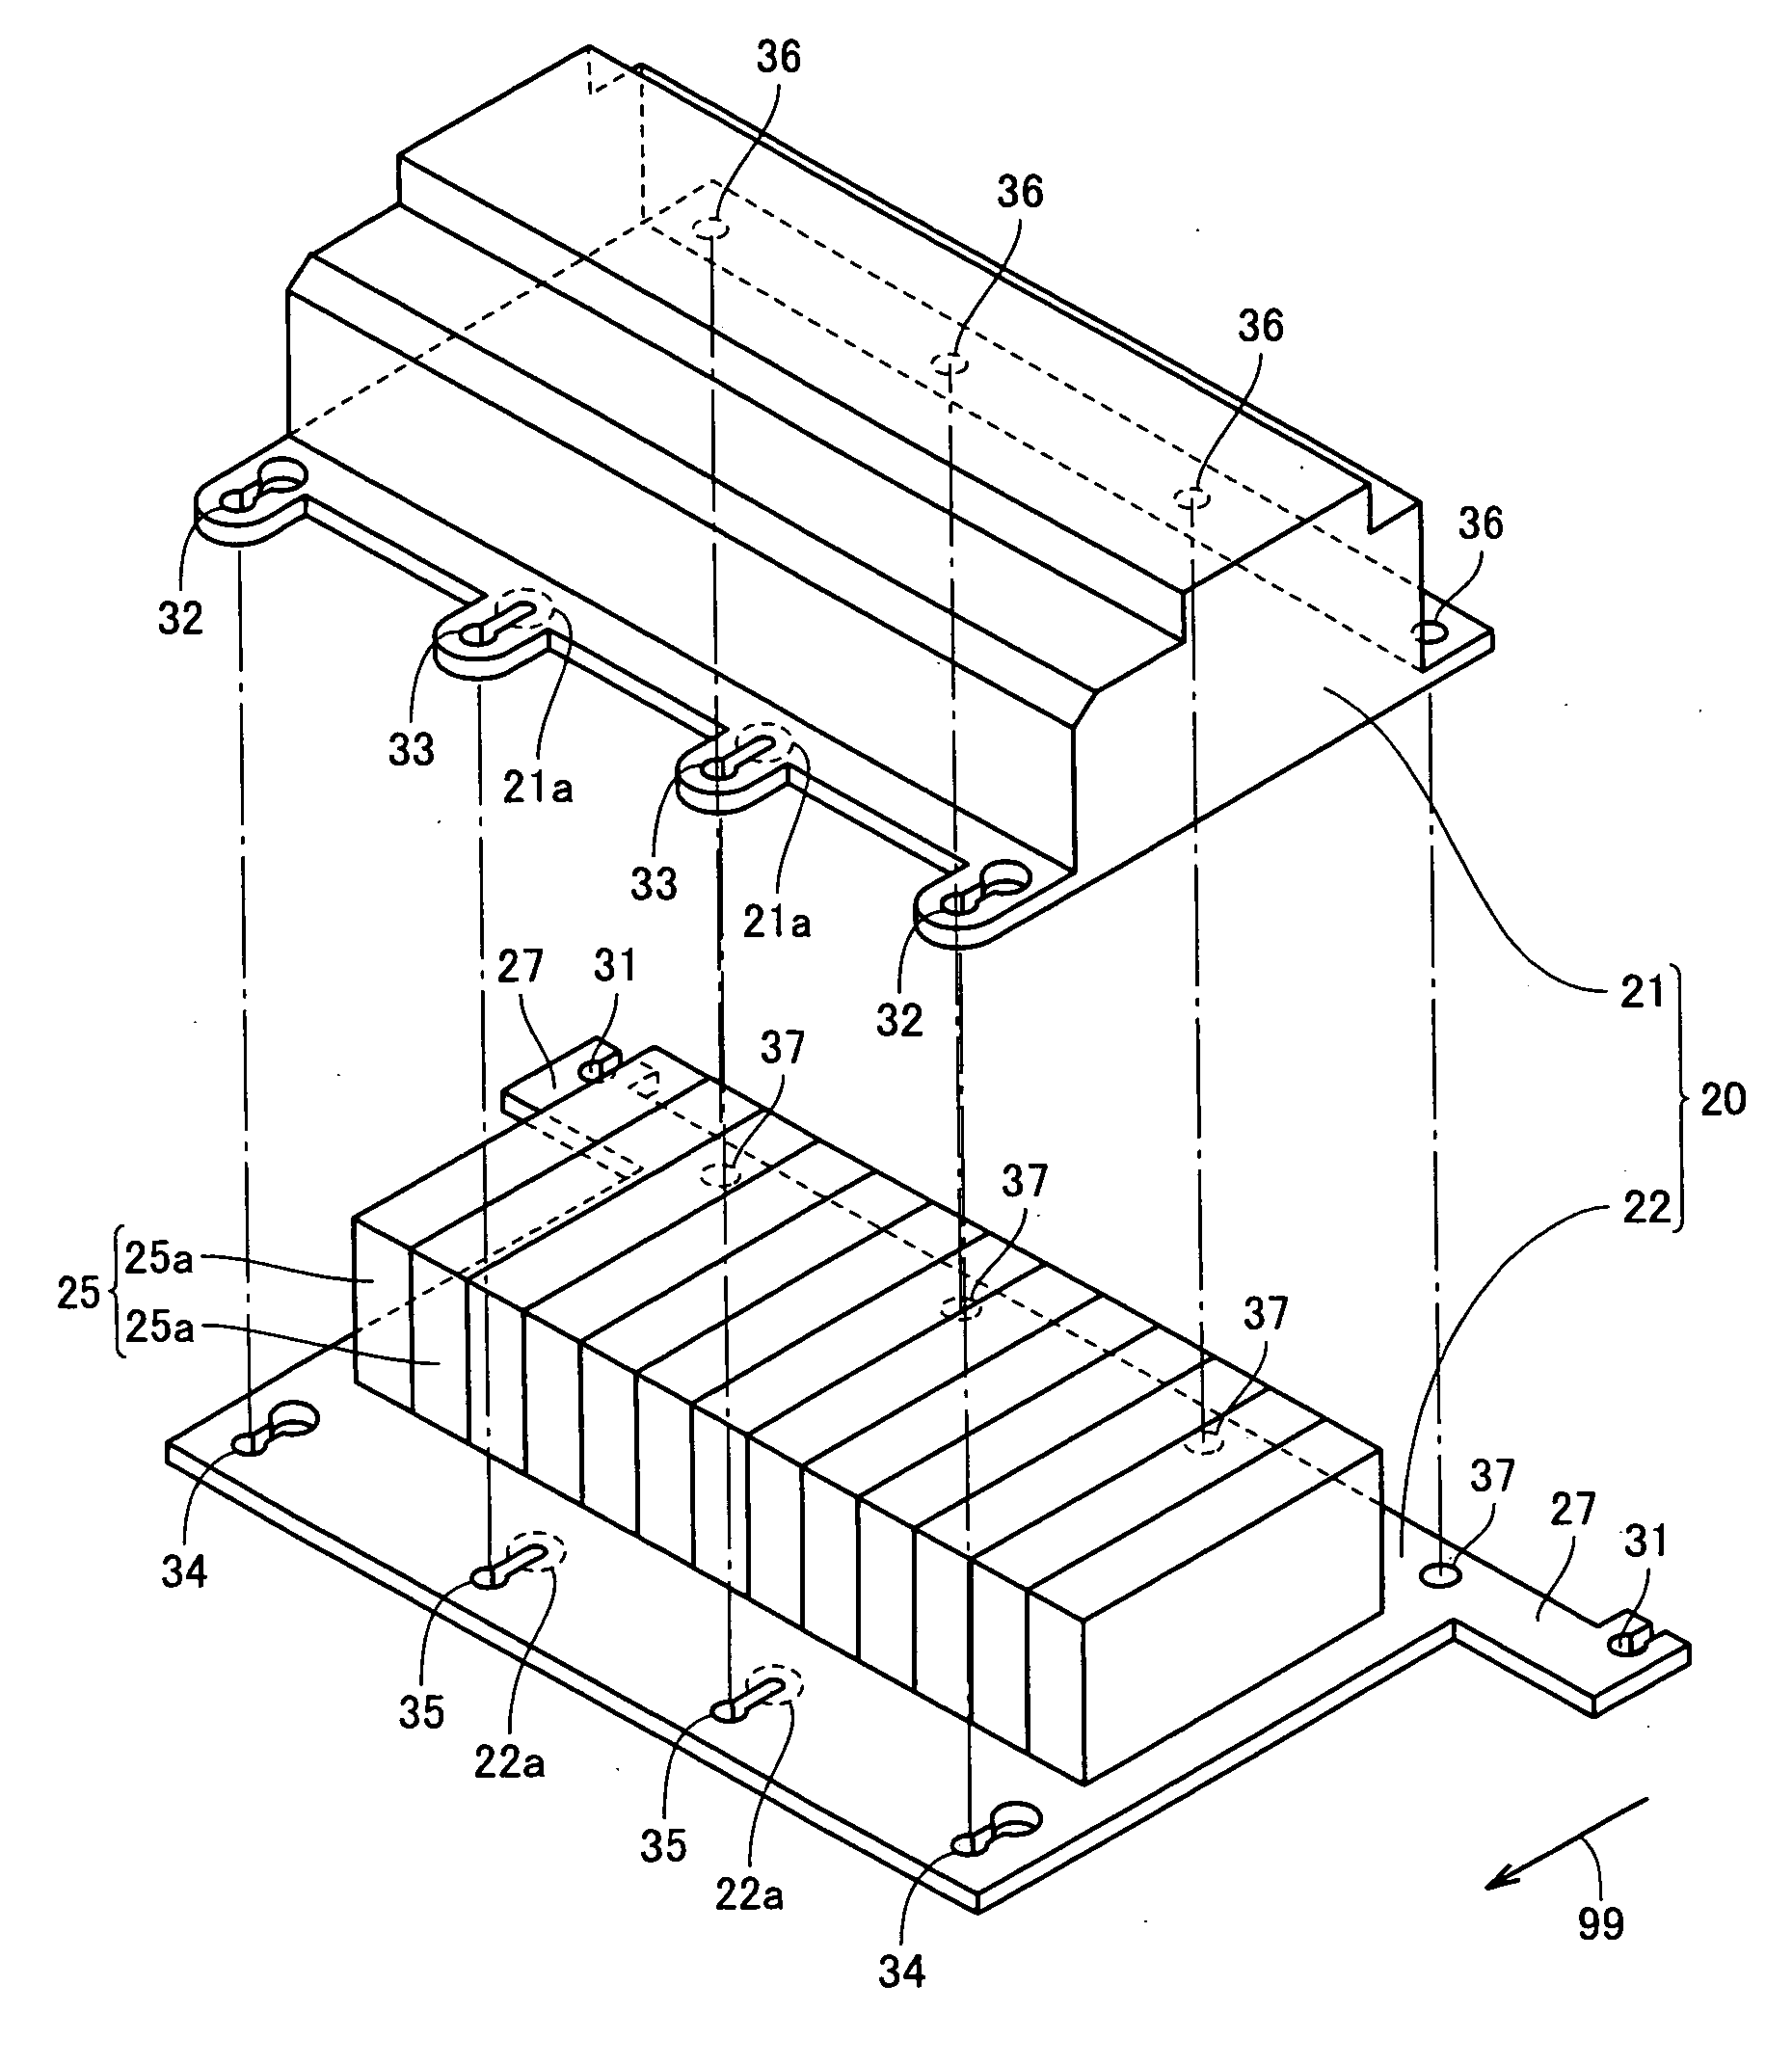 Structure for Mounting Electricity Storage Pack on Vehicle